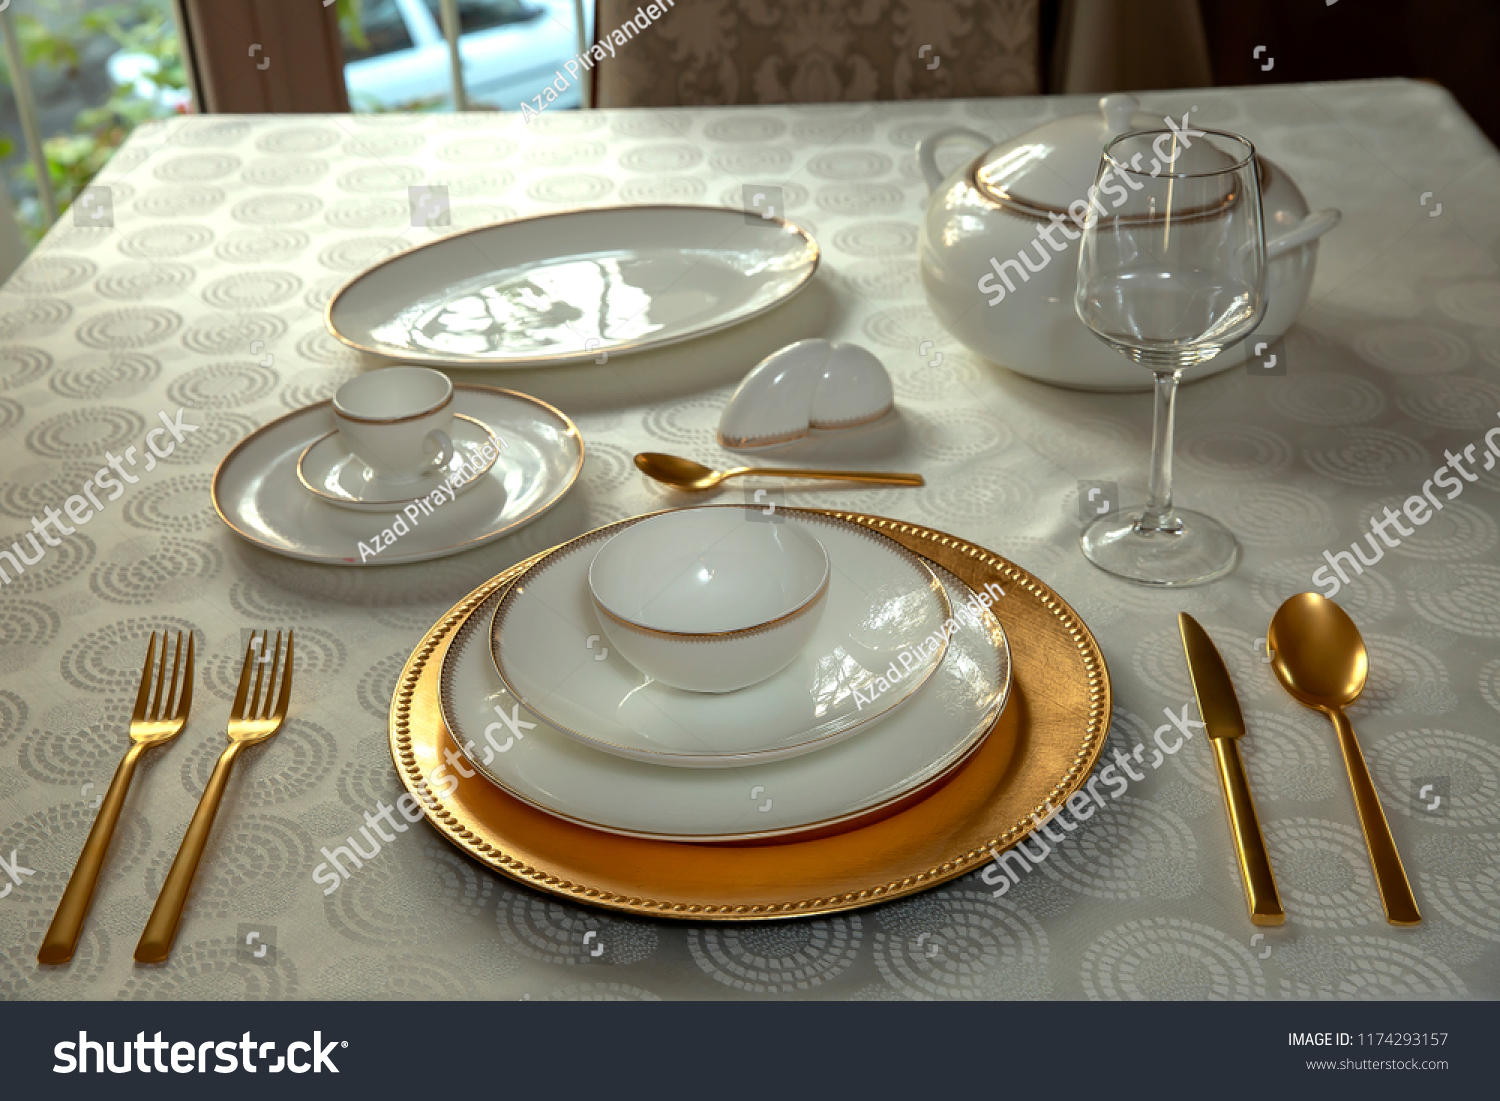 Lunch Table Setting Stock Photo Edit Now 1174293157